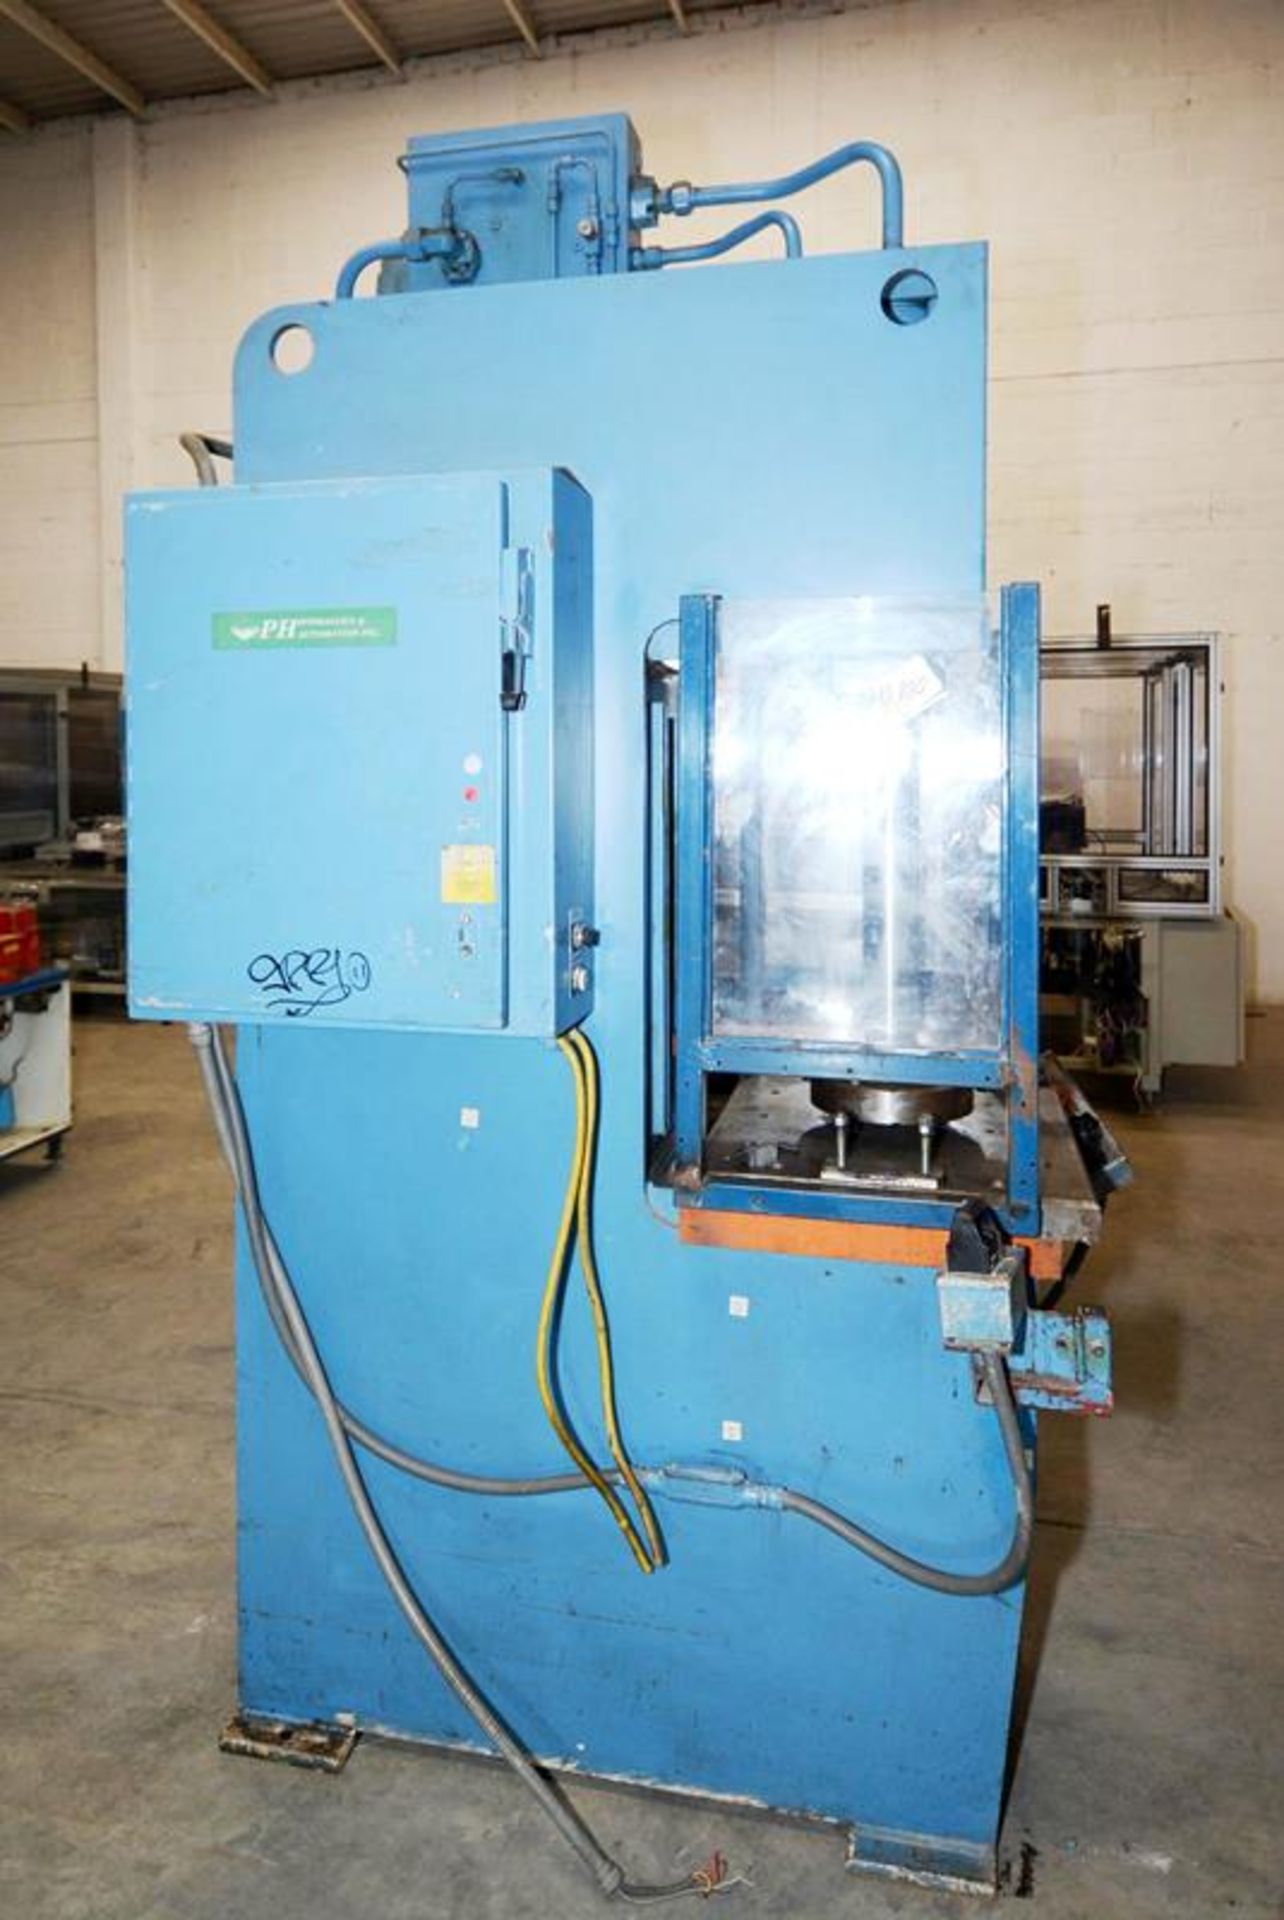 Equipment: Press. Brand: PH Hidraulics & Automation. Model: OGM-20. Year: N/A. Serial Number: 60668. - Image 12 of 14